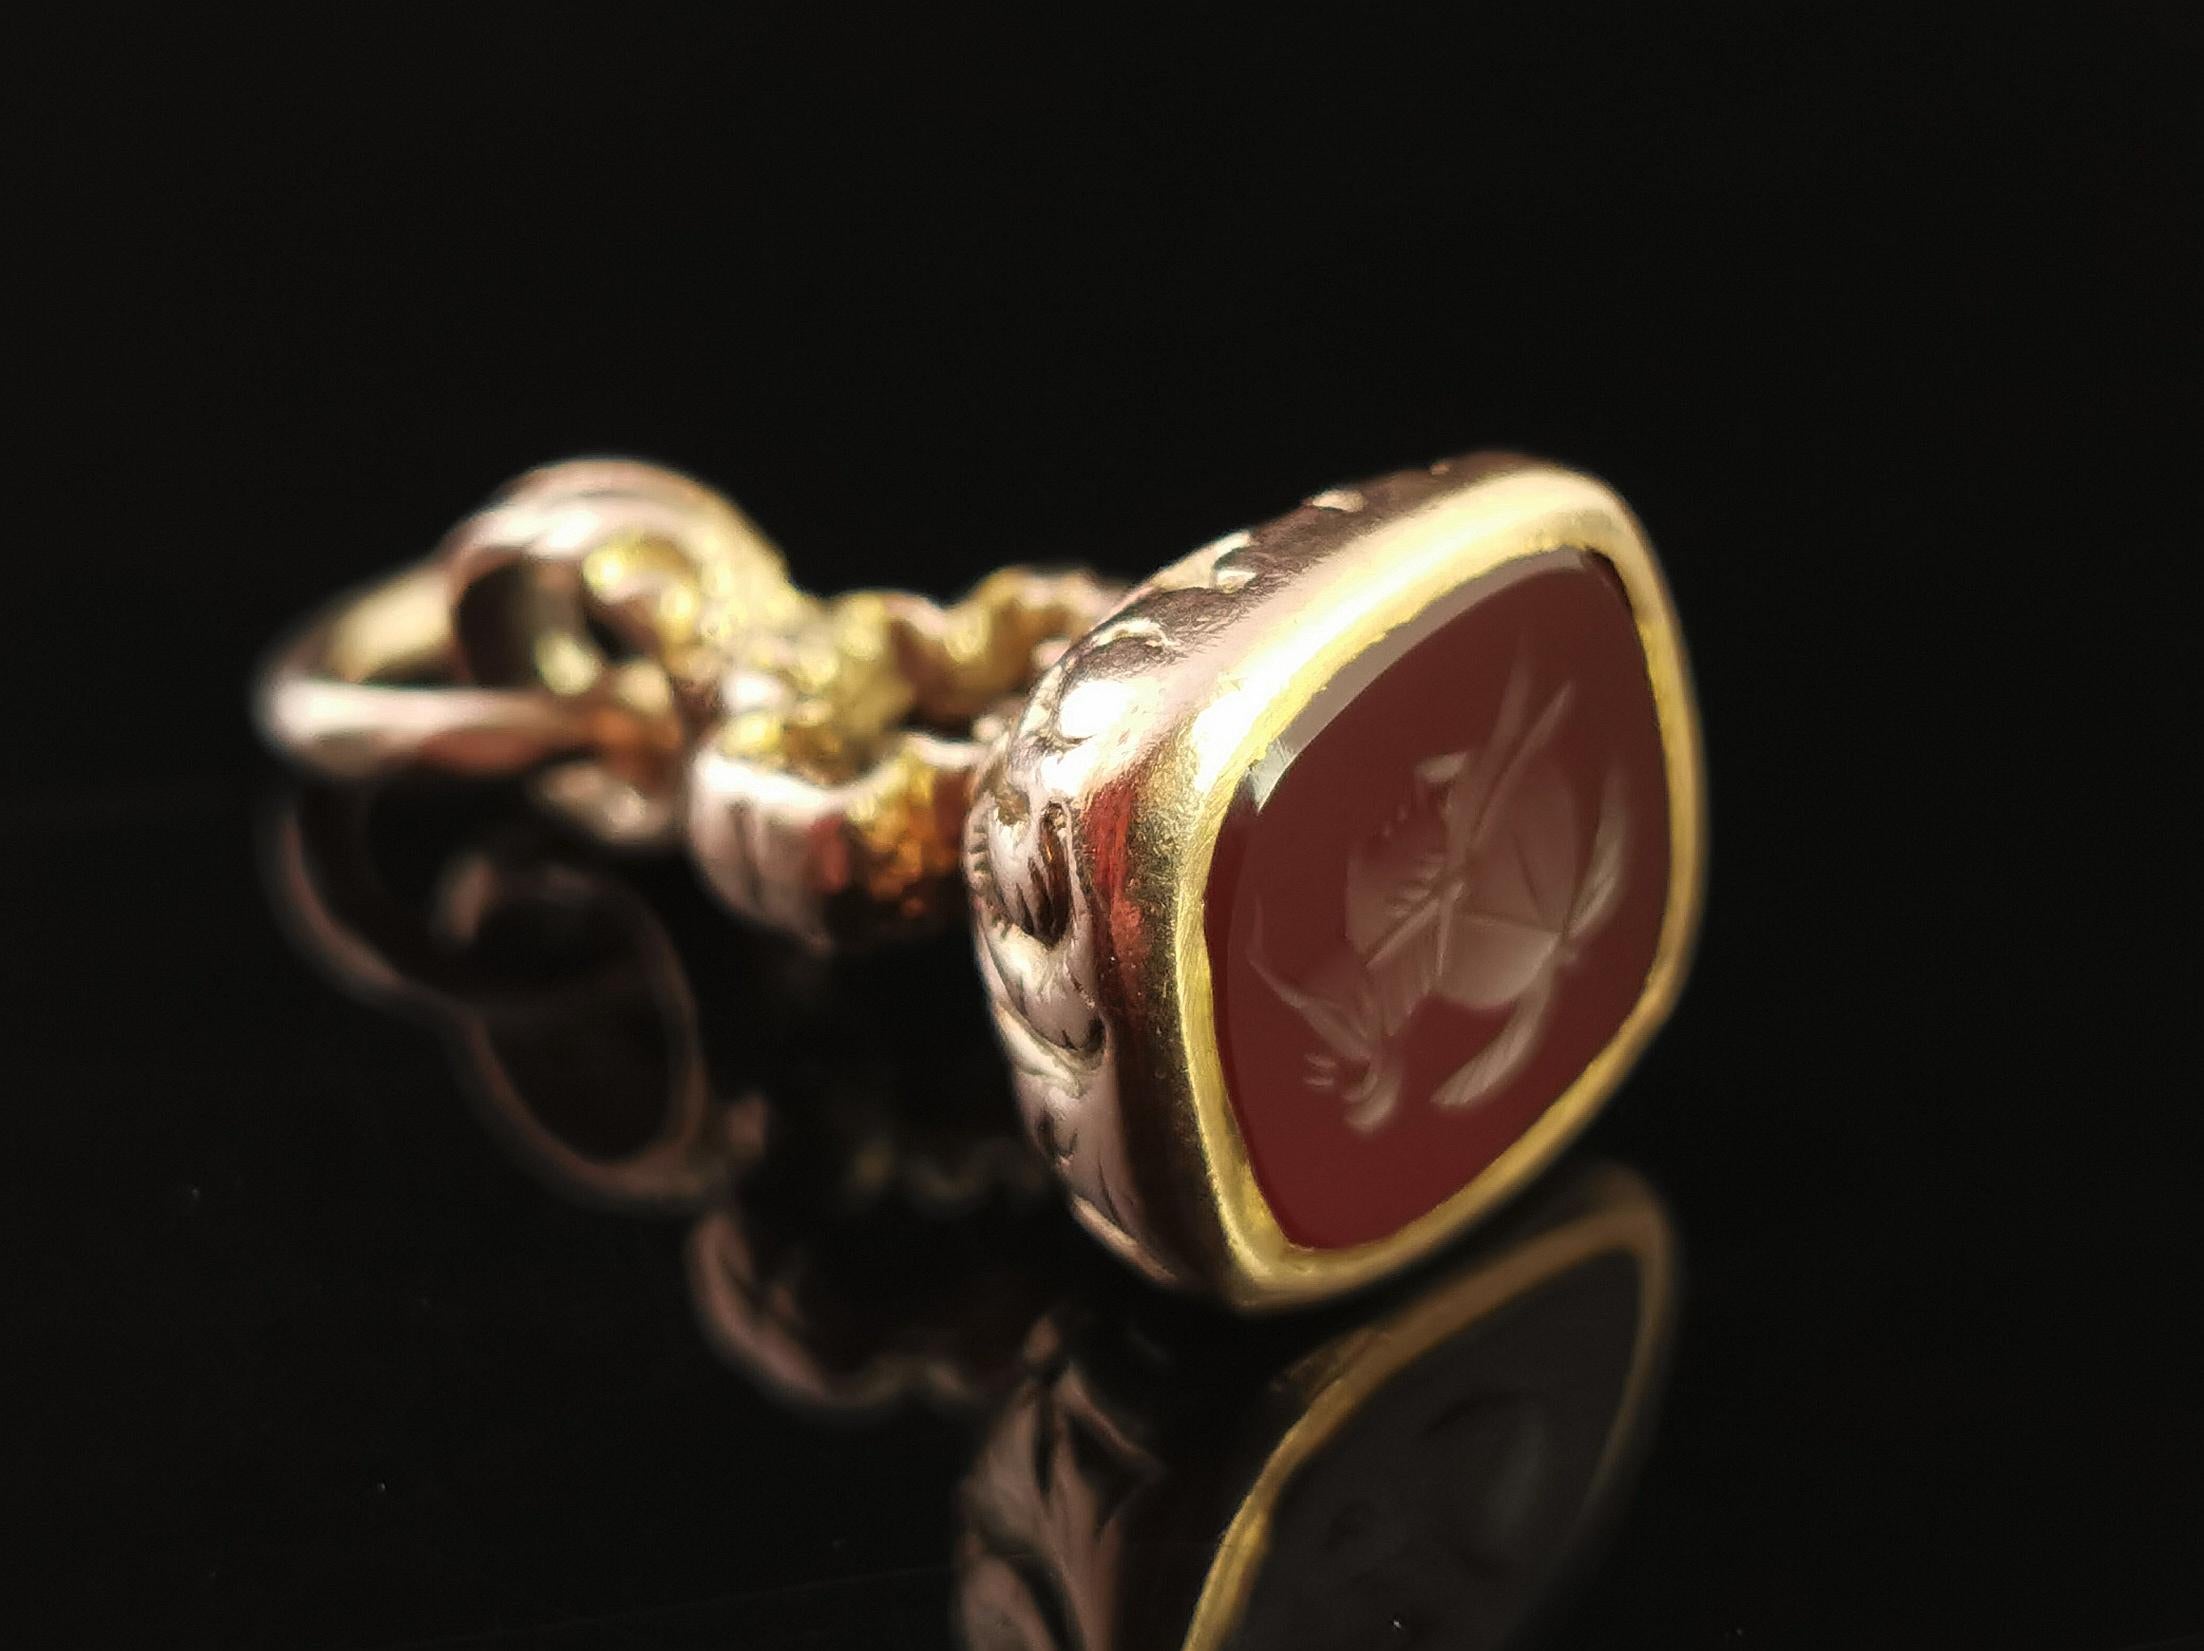 A beautiful antique, late Georgian era 9 karat yellow gold and Carnelian seal fob.

It is a very decorative seal fob with a chased and engraved base and a cross design to the centre, the base set with a rich red Carnelian stone.

The matrix has been